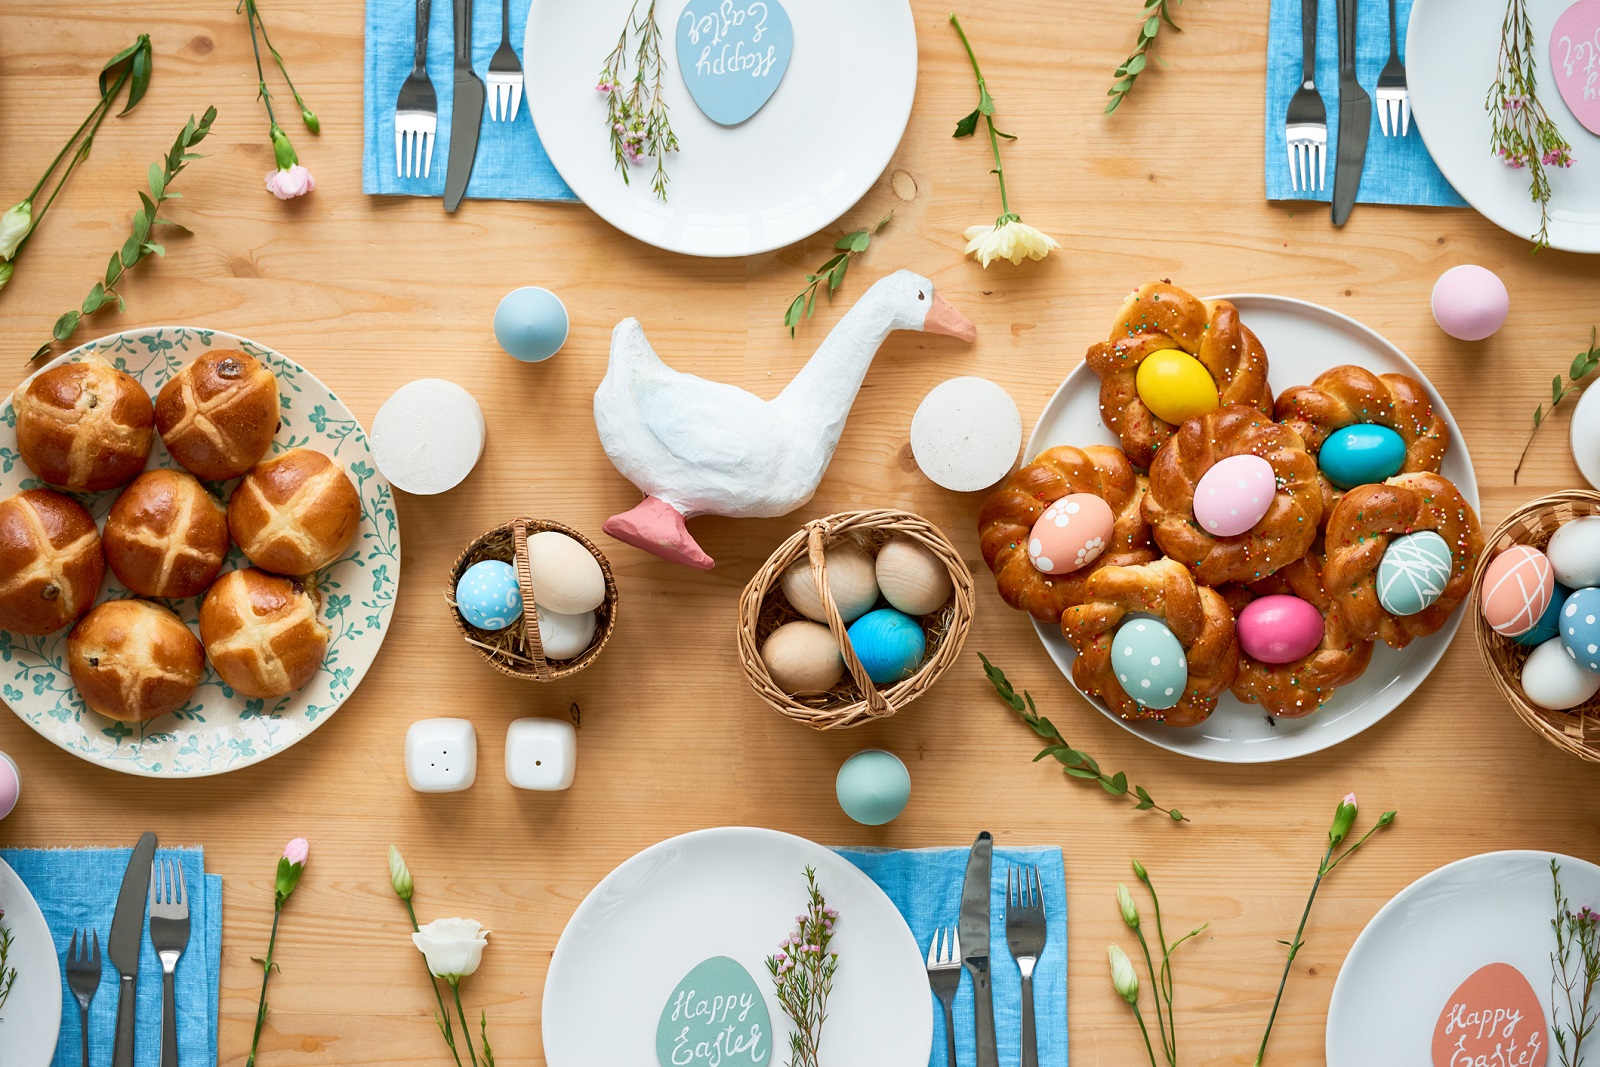 High angle view of picturesque Easter table: painted eggs in small baskets, freshly baked buns on plates and paper-mache goose at center